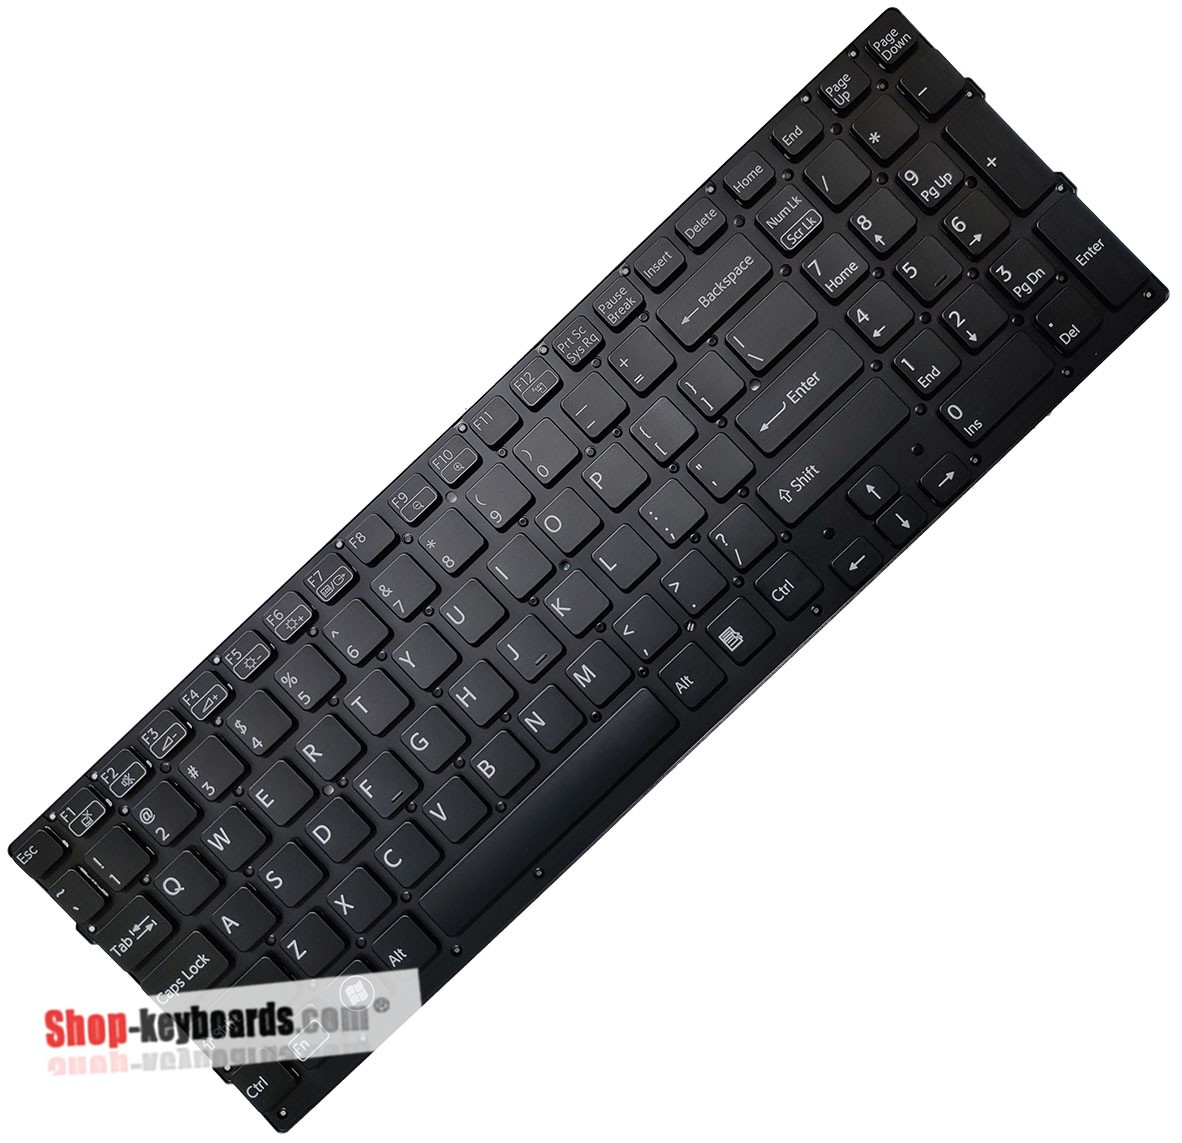 Sony VAIO VPC-F236HW/B Keyboard replacement